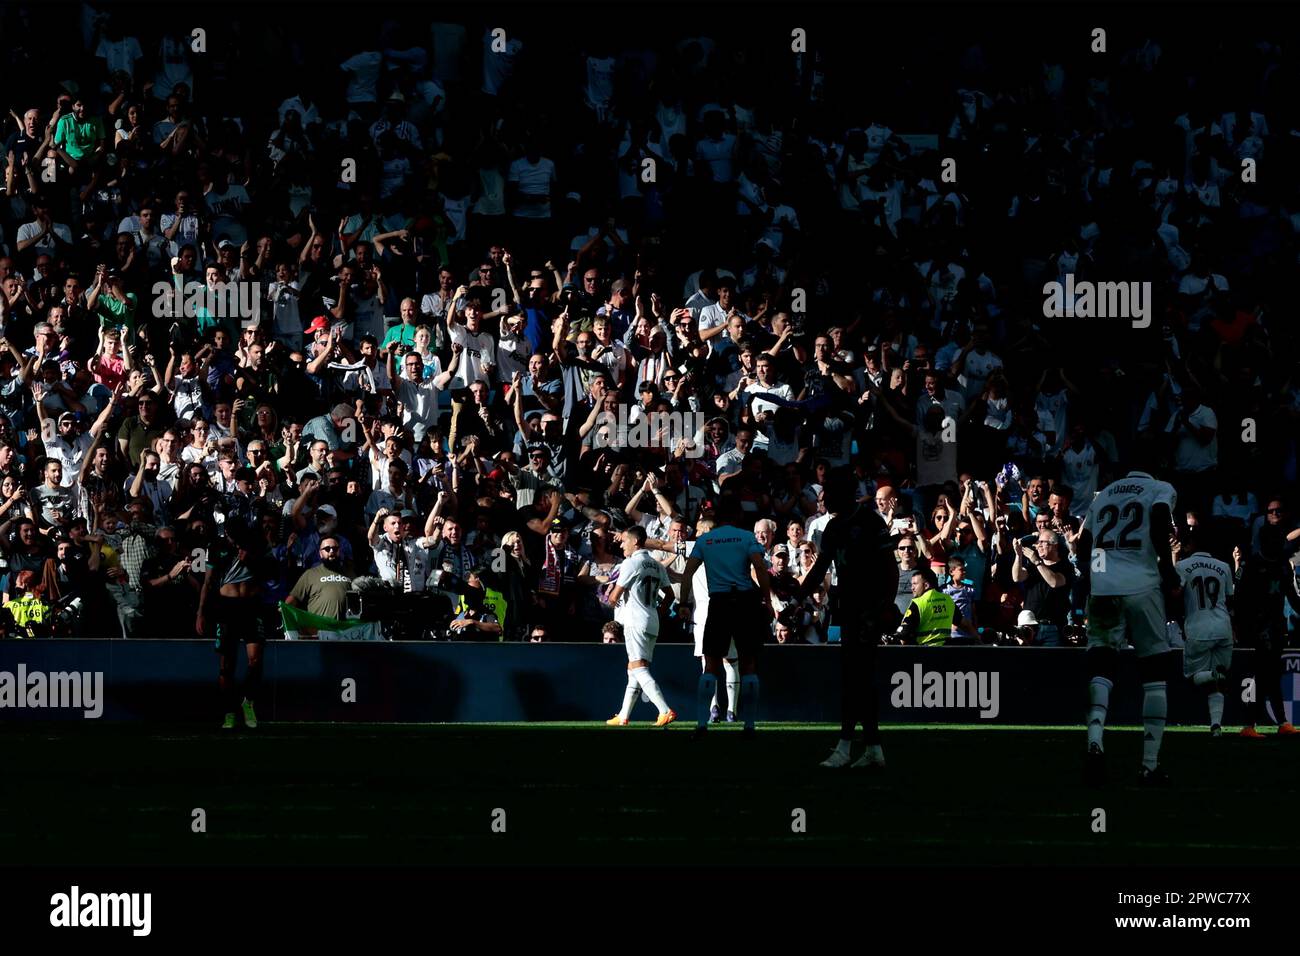 Madrid, Spain. 29th Apr, 2023. Madrid, Spain, 29.04.2023.- Benzema goal celebration. Real Madrid vs Almeria match of the Spanish Soccer League on matchday 32 held at the Santiago Bernabeu Stadium in the capital of the Kingdom of Spain. Final result 4-2. Real Madrid goals from Benzema 2 ,17 , 42 (P), Rodrygo 47 . Goals from Almeria Lazaro Vinicius 40' 5, and Lucas Robertone 61' Credit: Juan Carlos Rojas/dpa/Alamy Live News Stock Photo